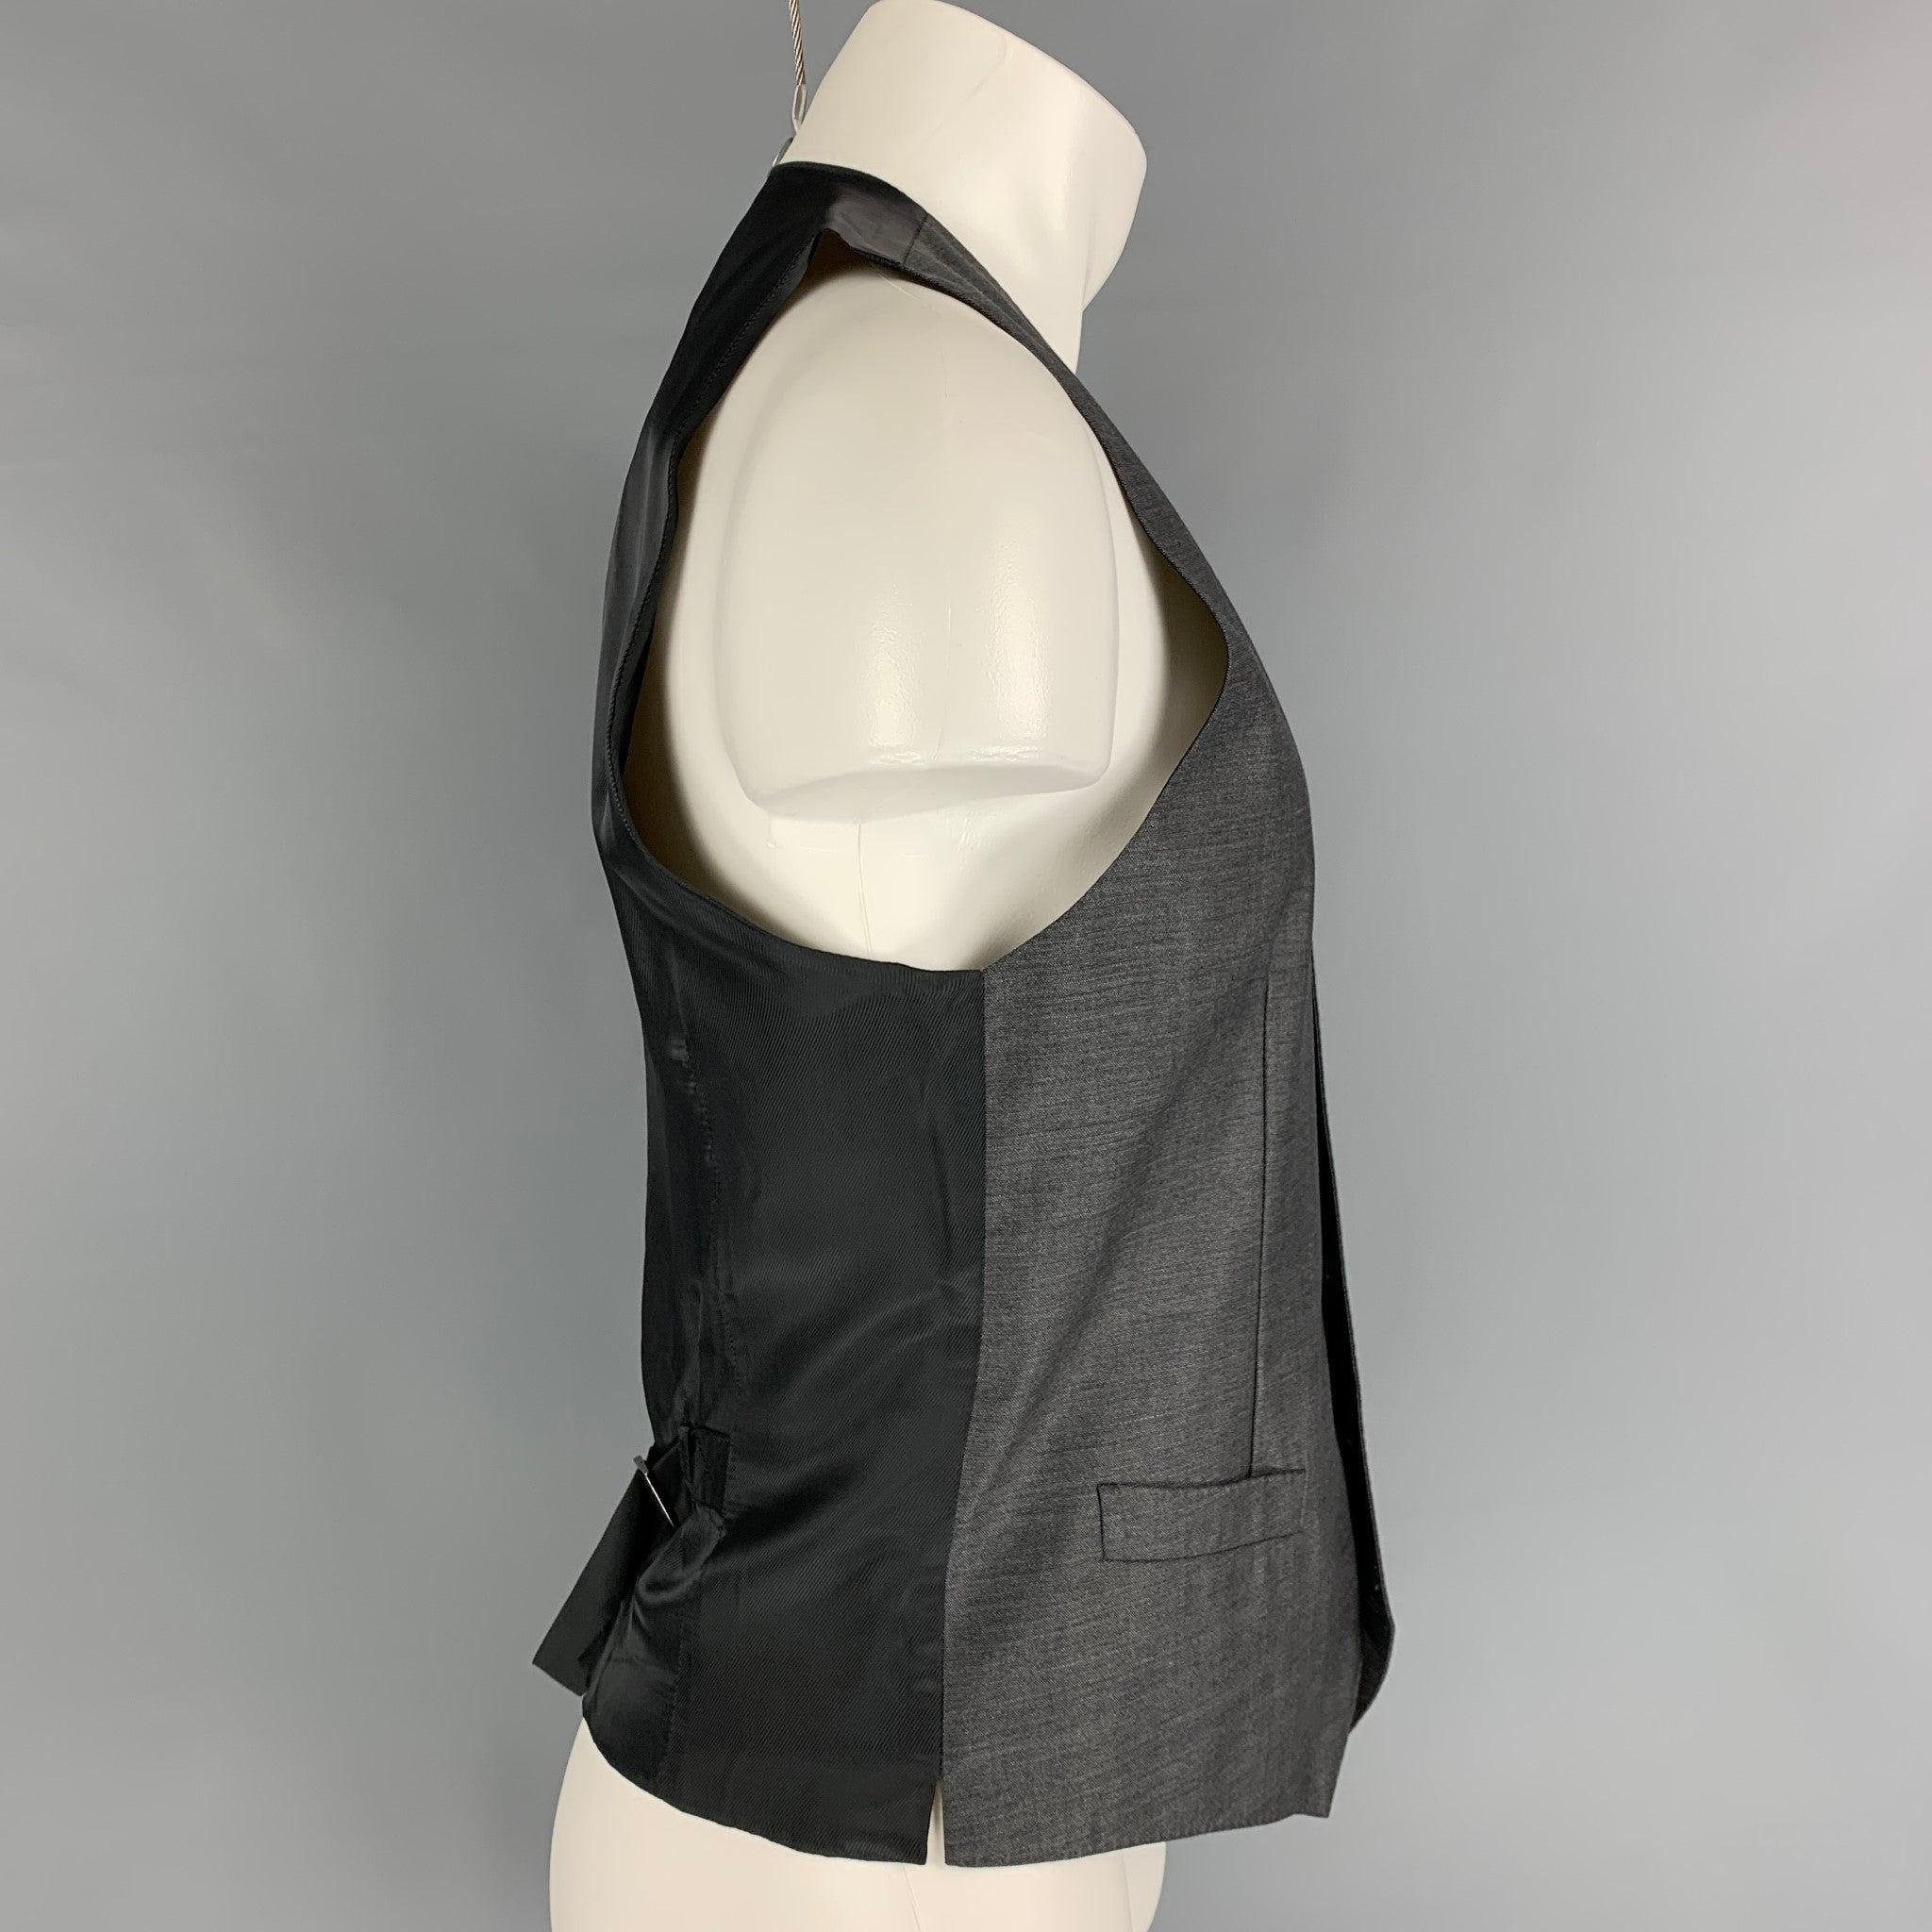 DOLCE & GABBANA
dress vest comes in a dark gray & black wool / silk with a featuring a back belt, front pockets, and a buttoned closure.
Very Good
Pre-Owned Condition. 

Marked:   48 

Measurements: 
 
Shoulder: 13.5 inches  Chest: 38 inches 